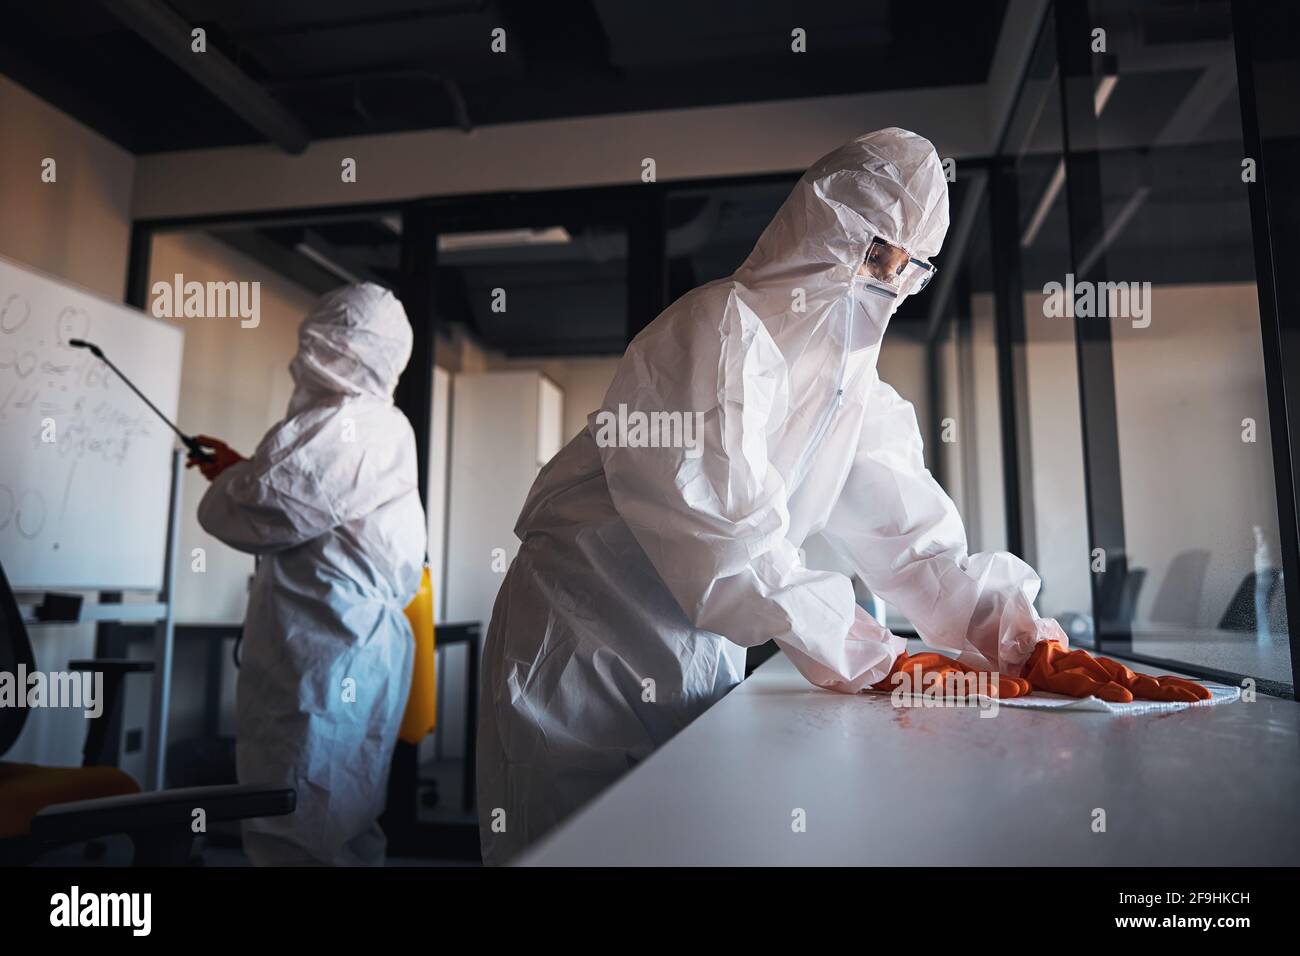 Cleaning staff in protective gear disinfecting the office workplaces Stock Photo